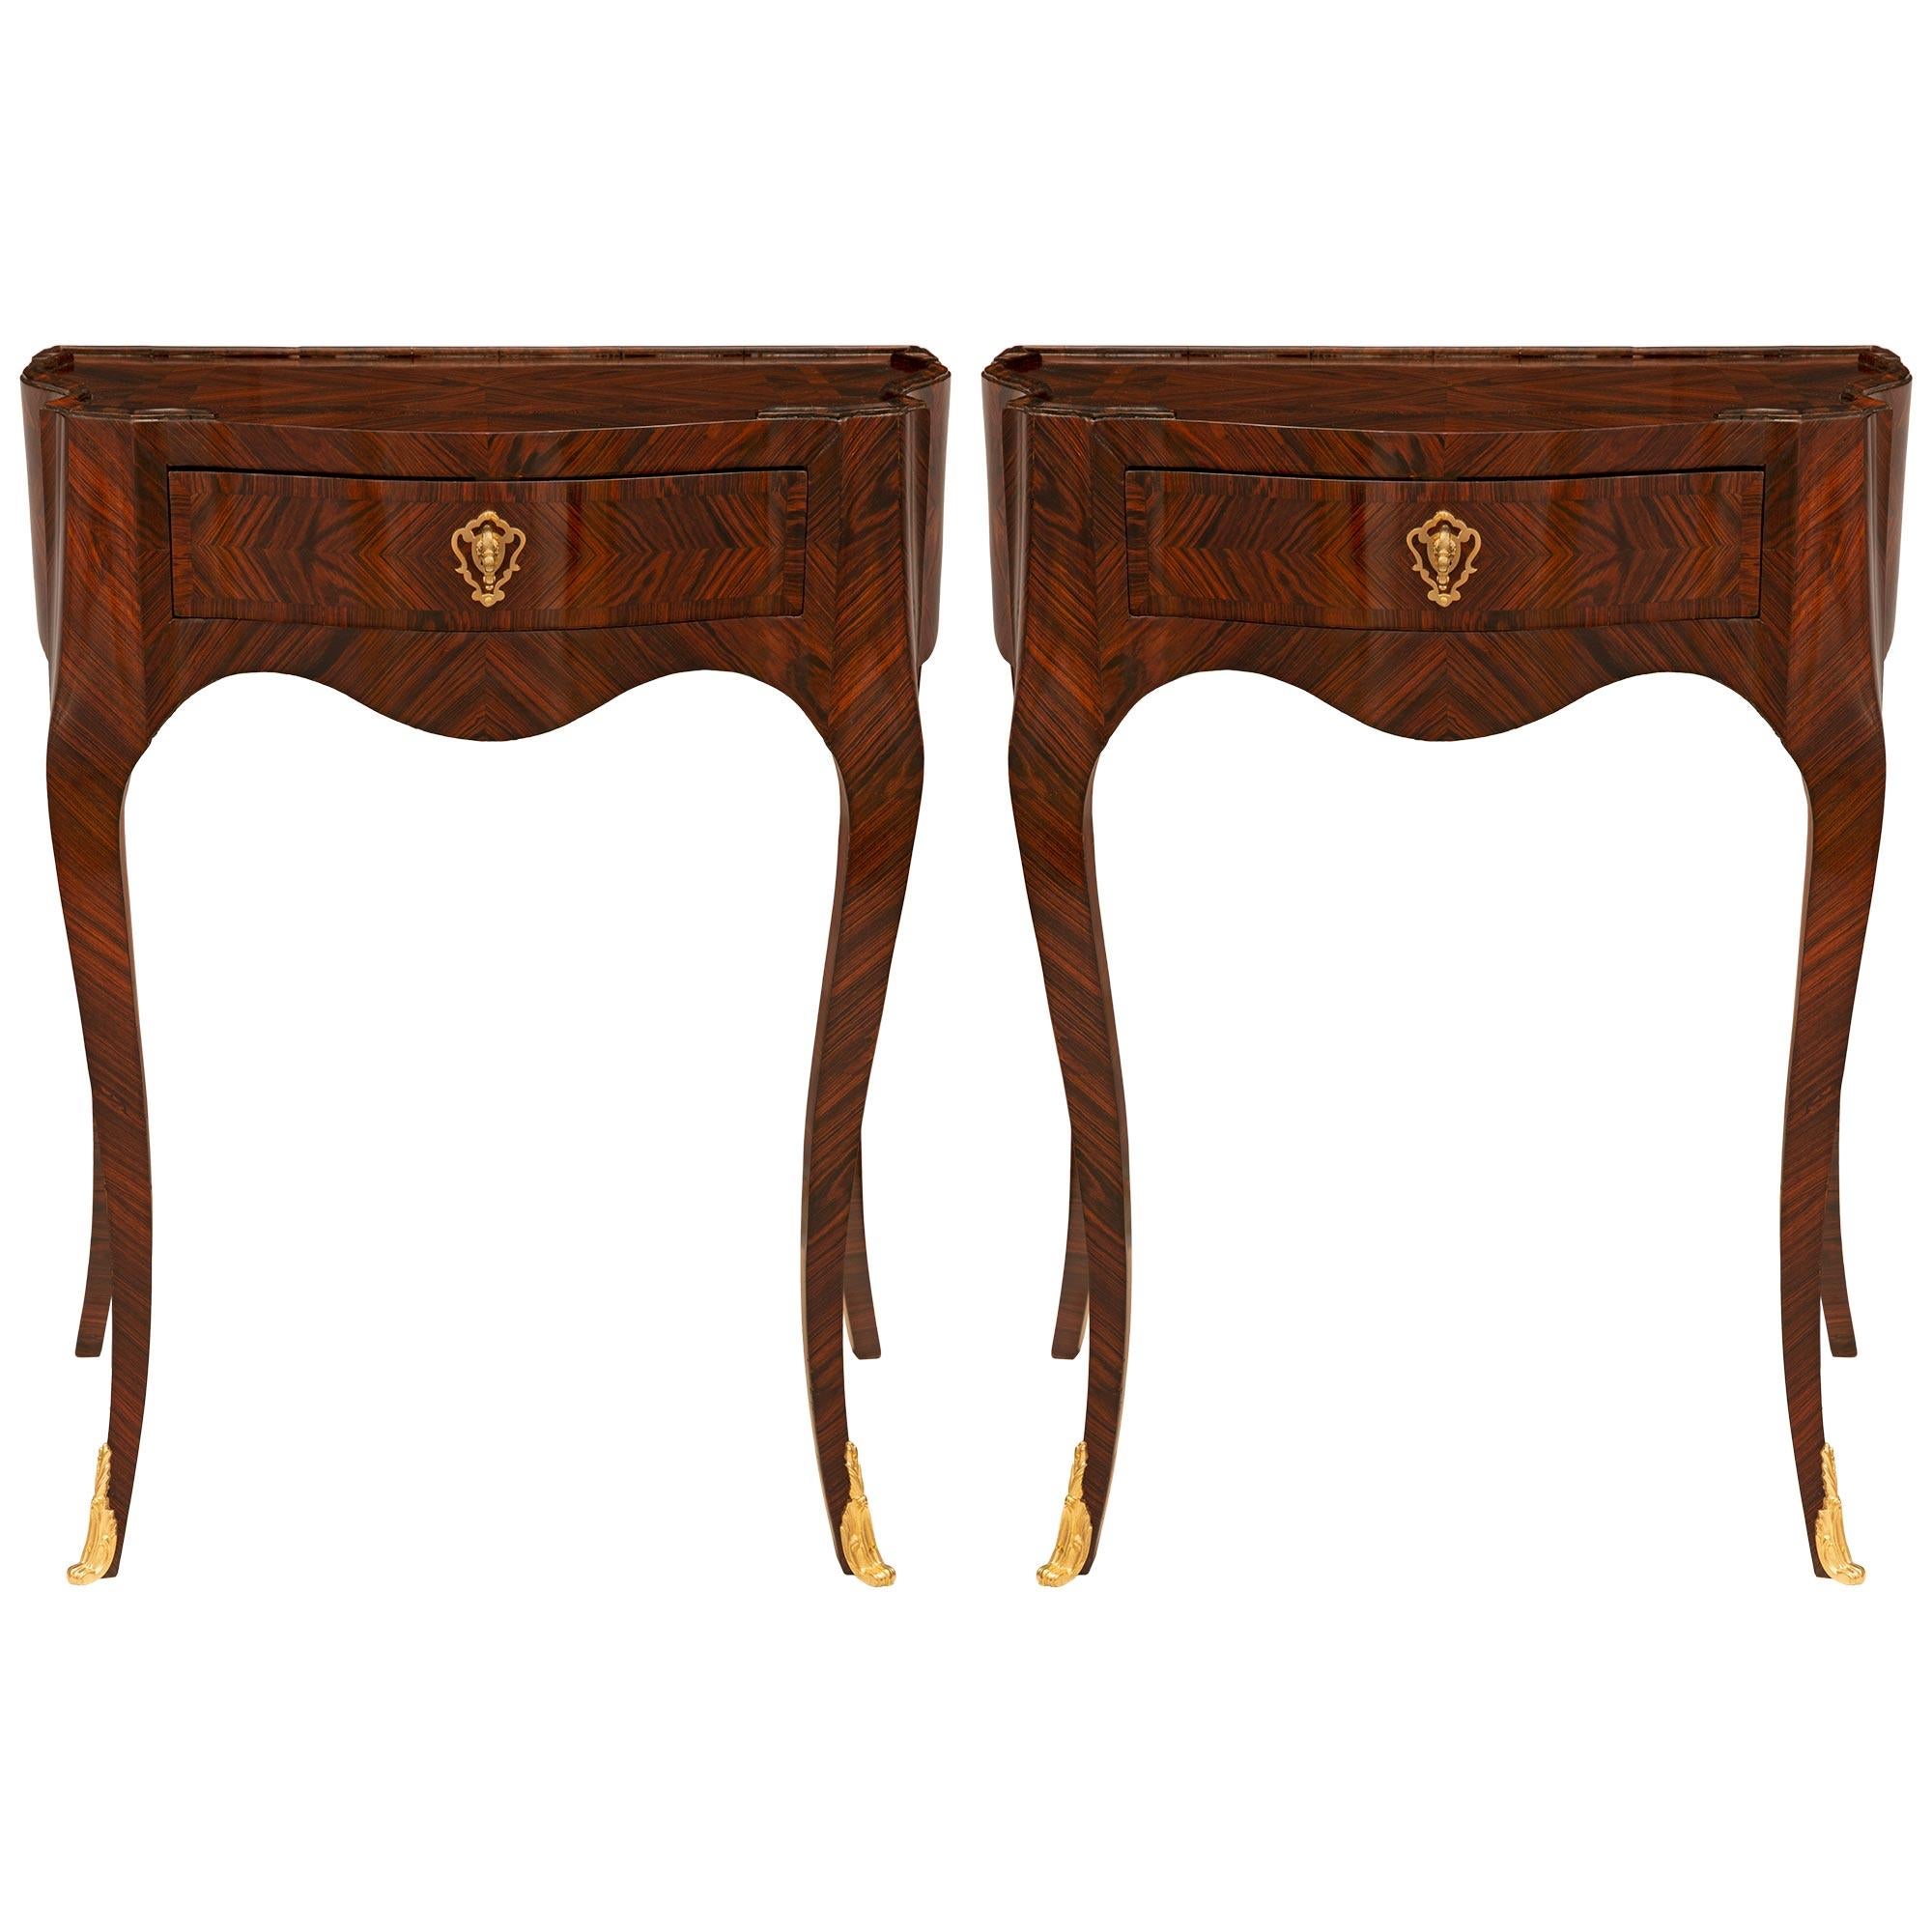 Pair Of Italian 19th Century Genovese St. Rosewood And Ormolu Side Tables For Sale 5